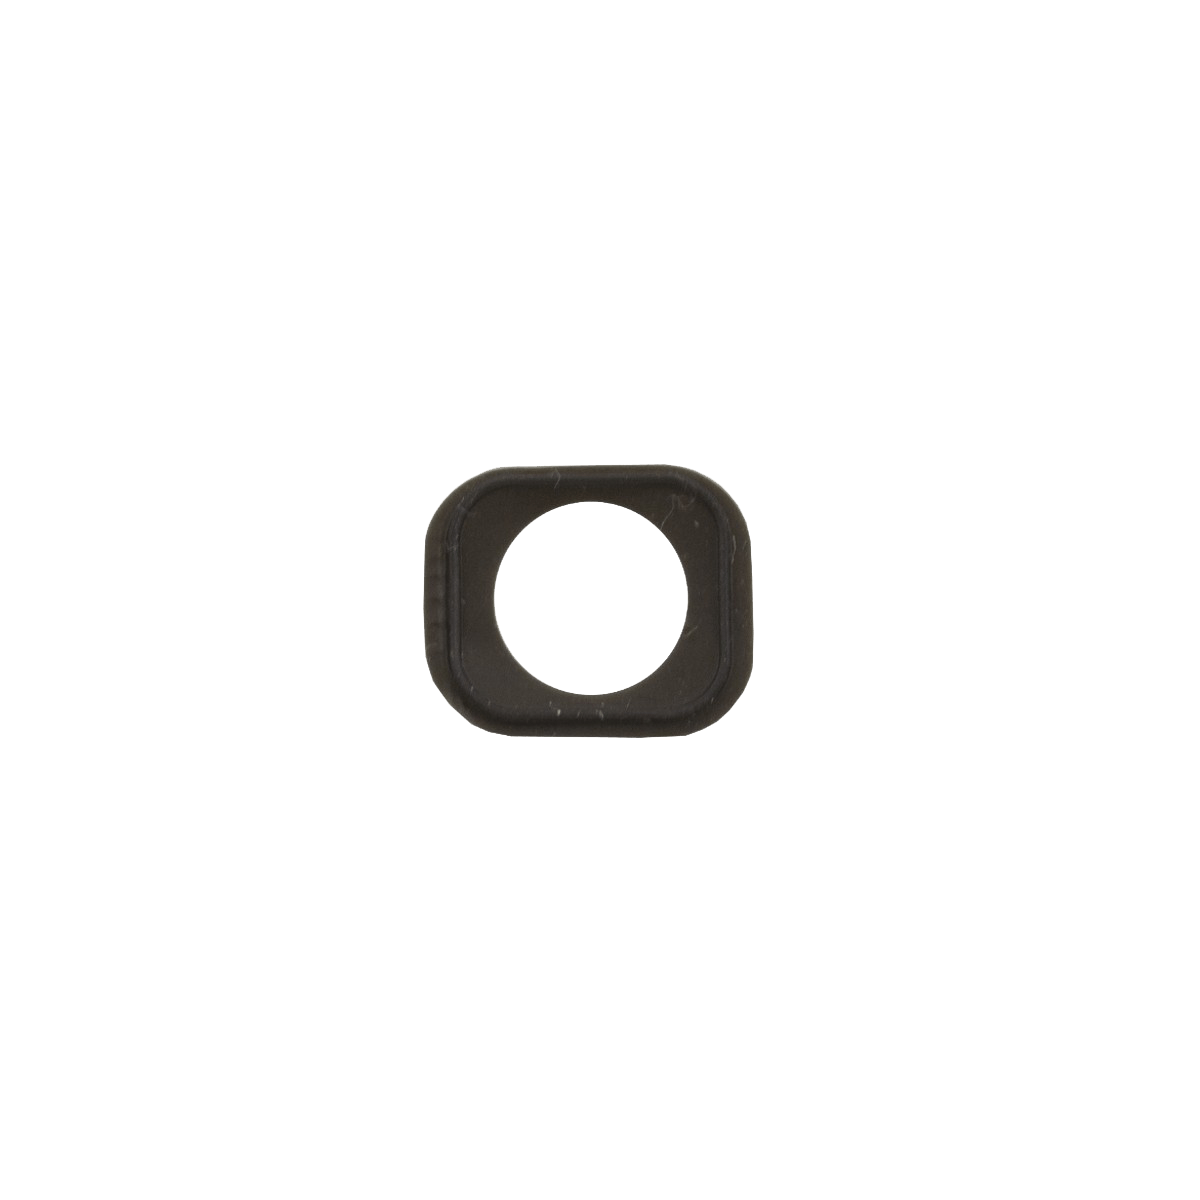 iPhone 5 Home Button Gasket Replacement